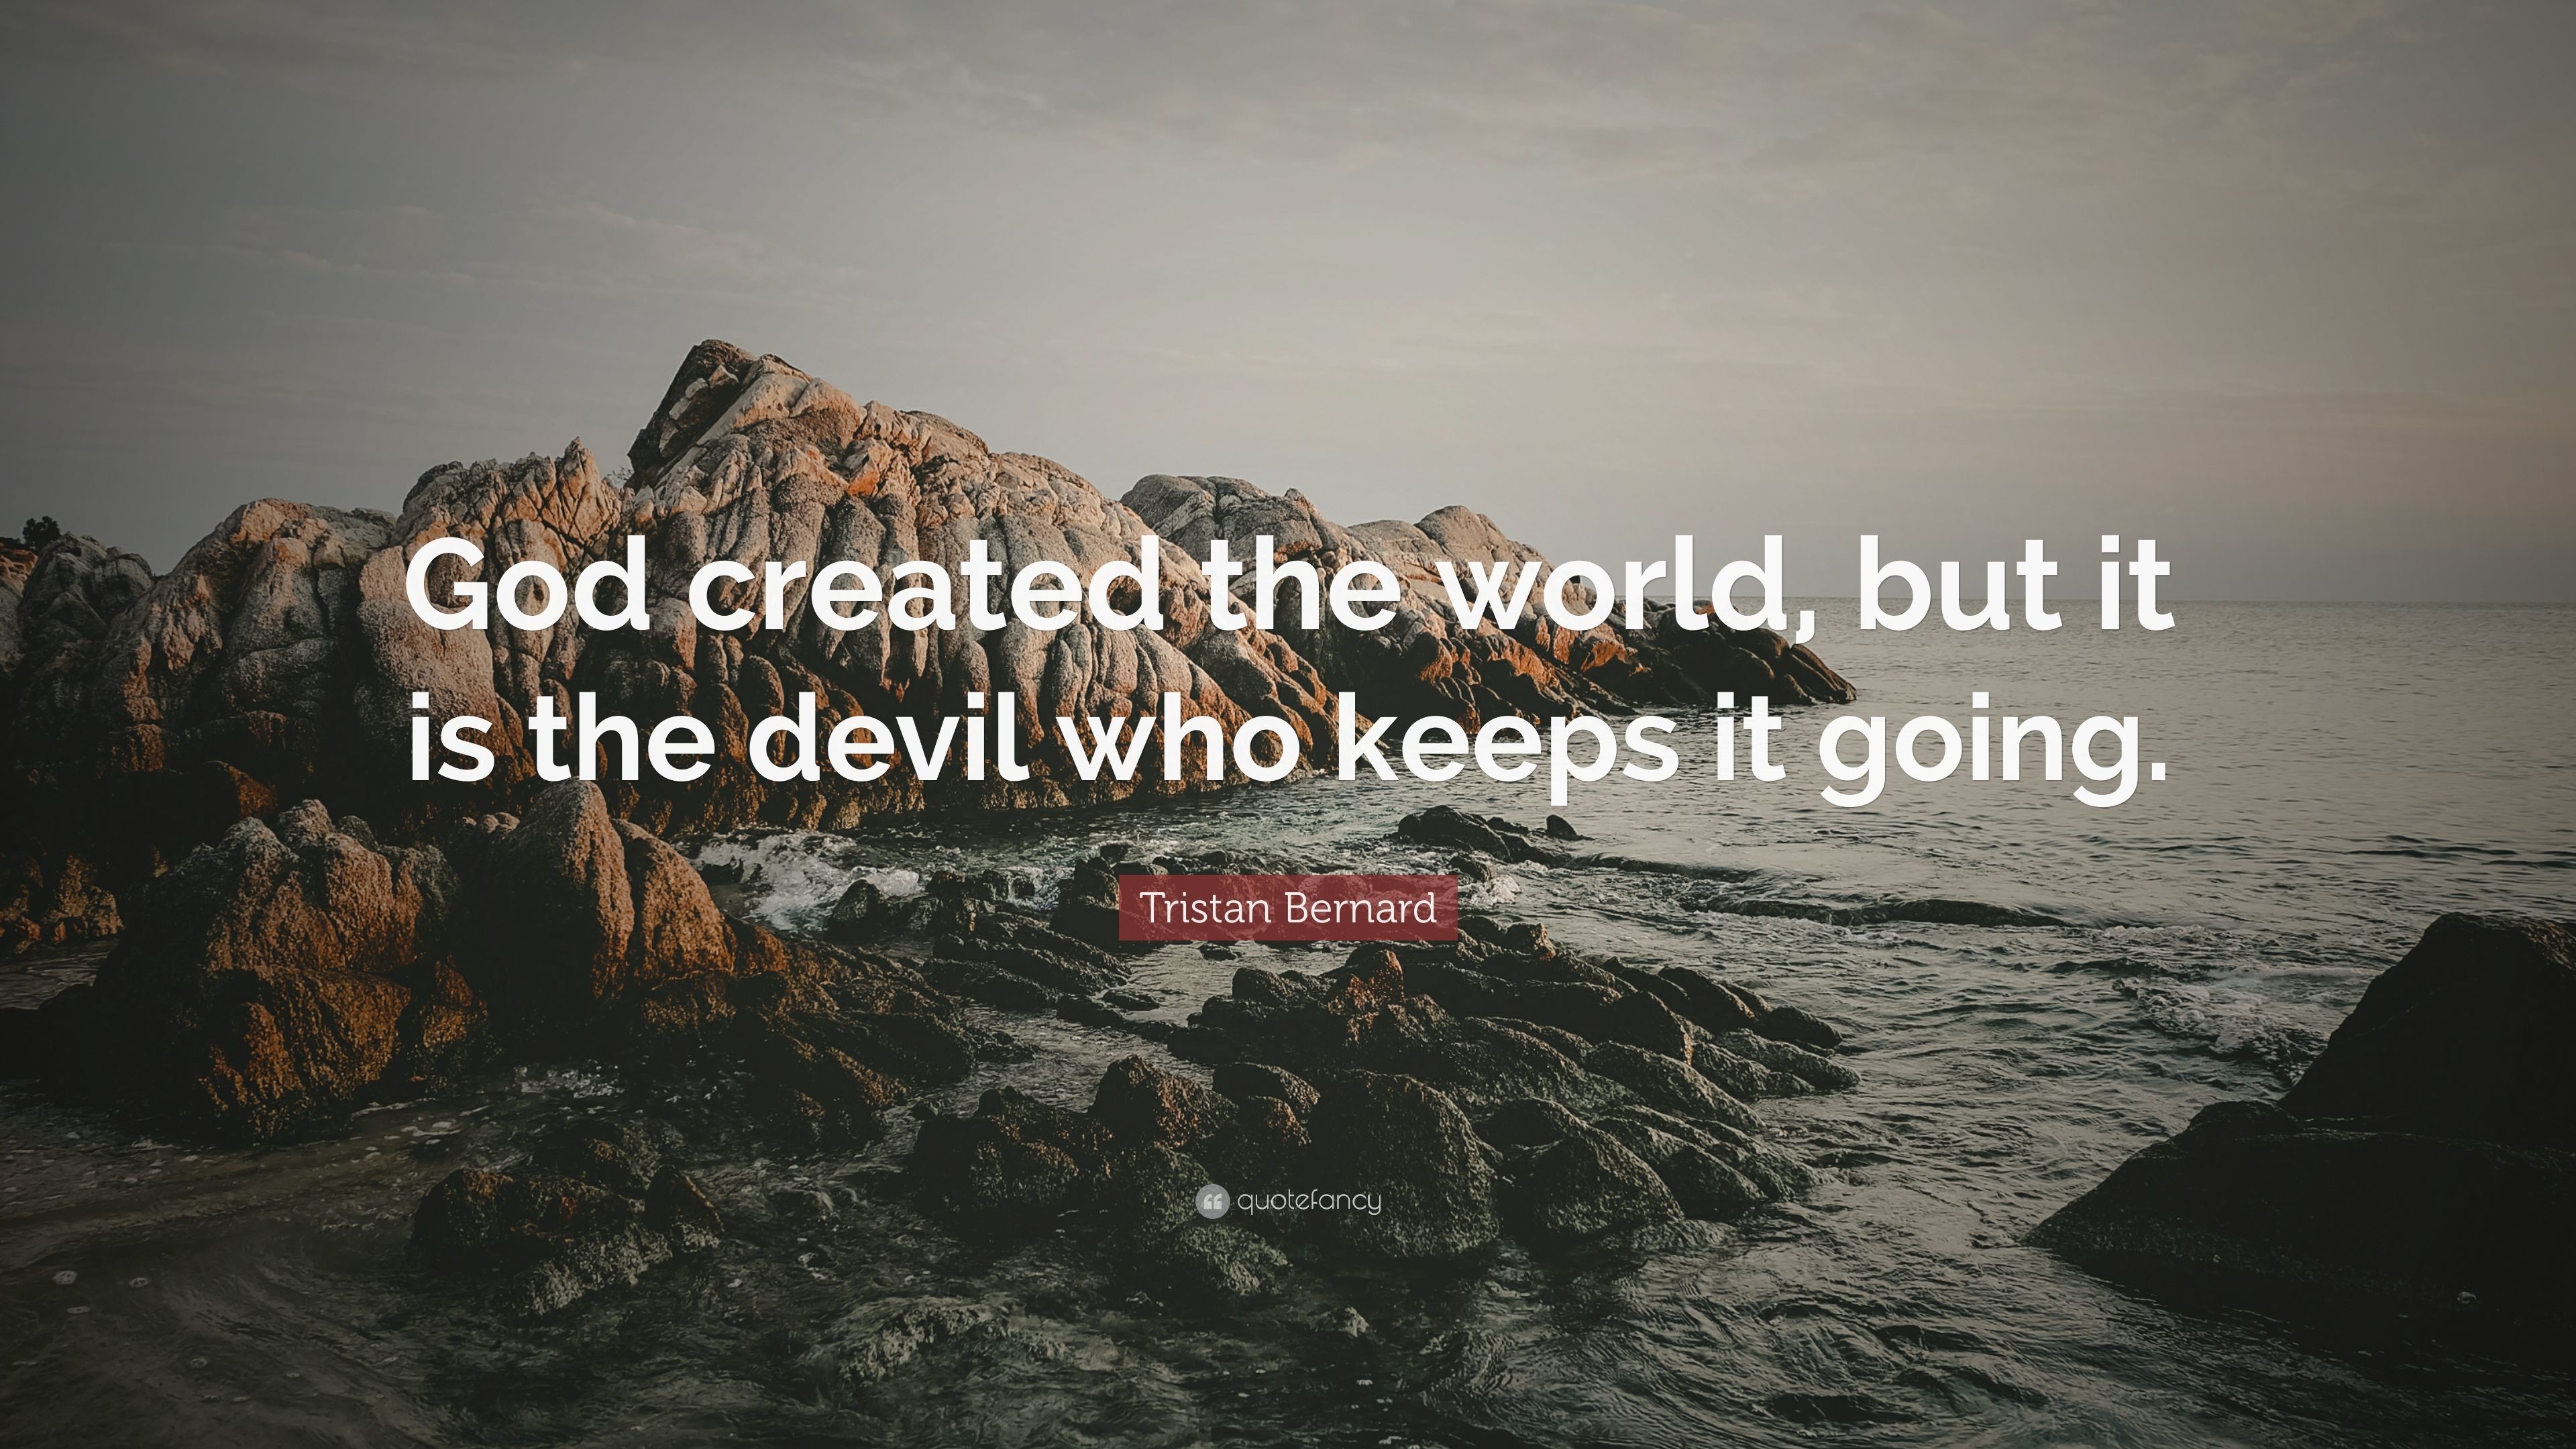 3840x2160 Tristan Bernard Quote: “God created the world, but it is the devil who